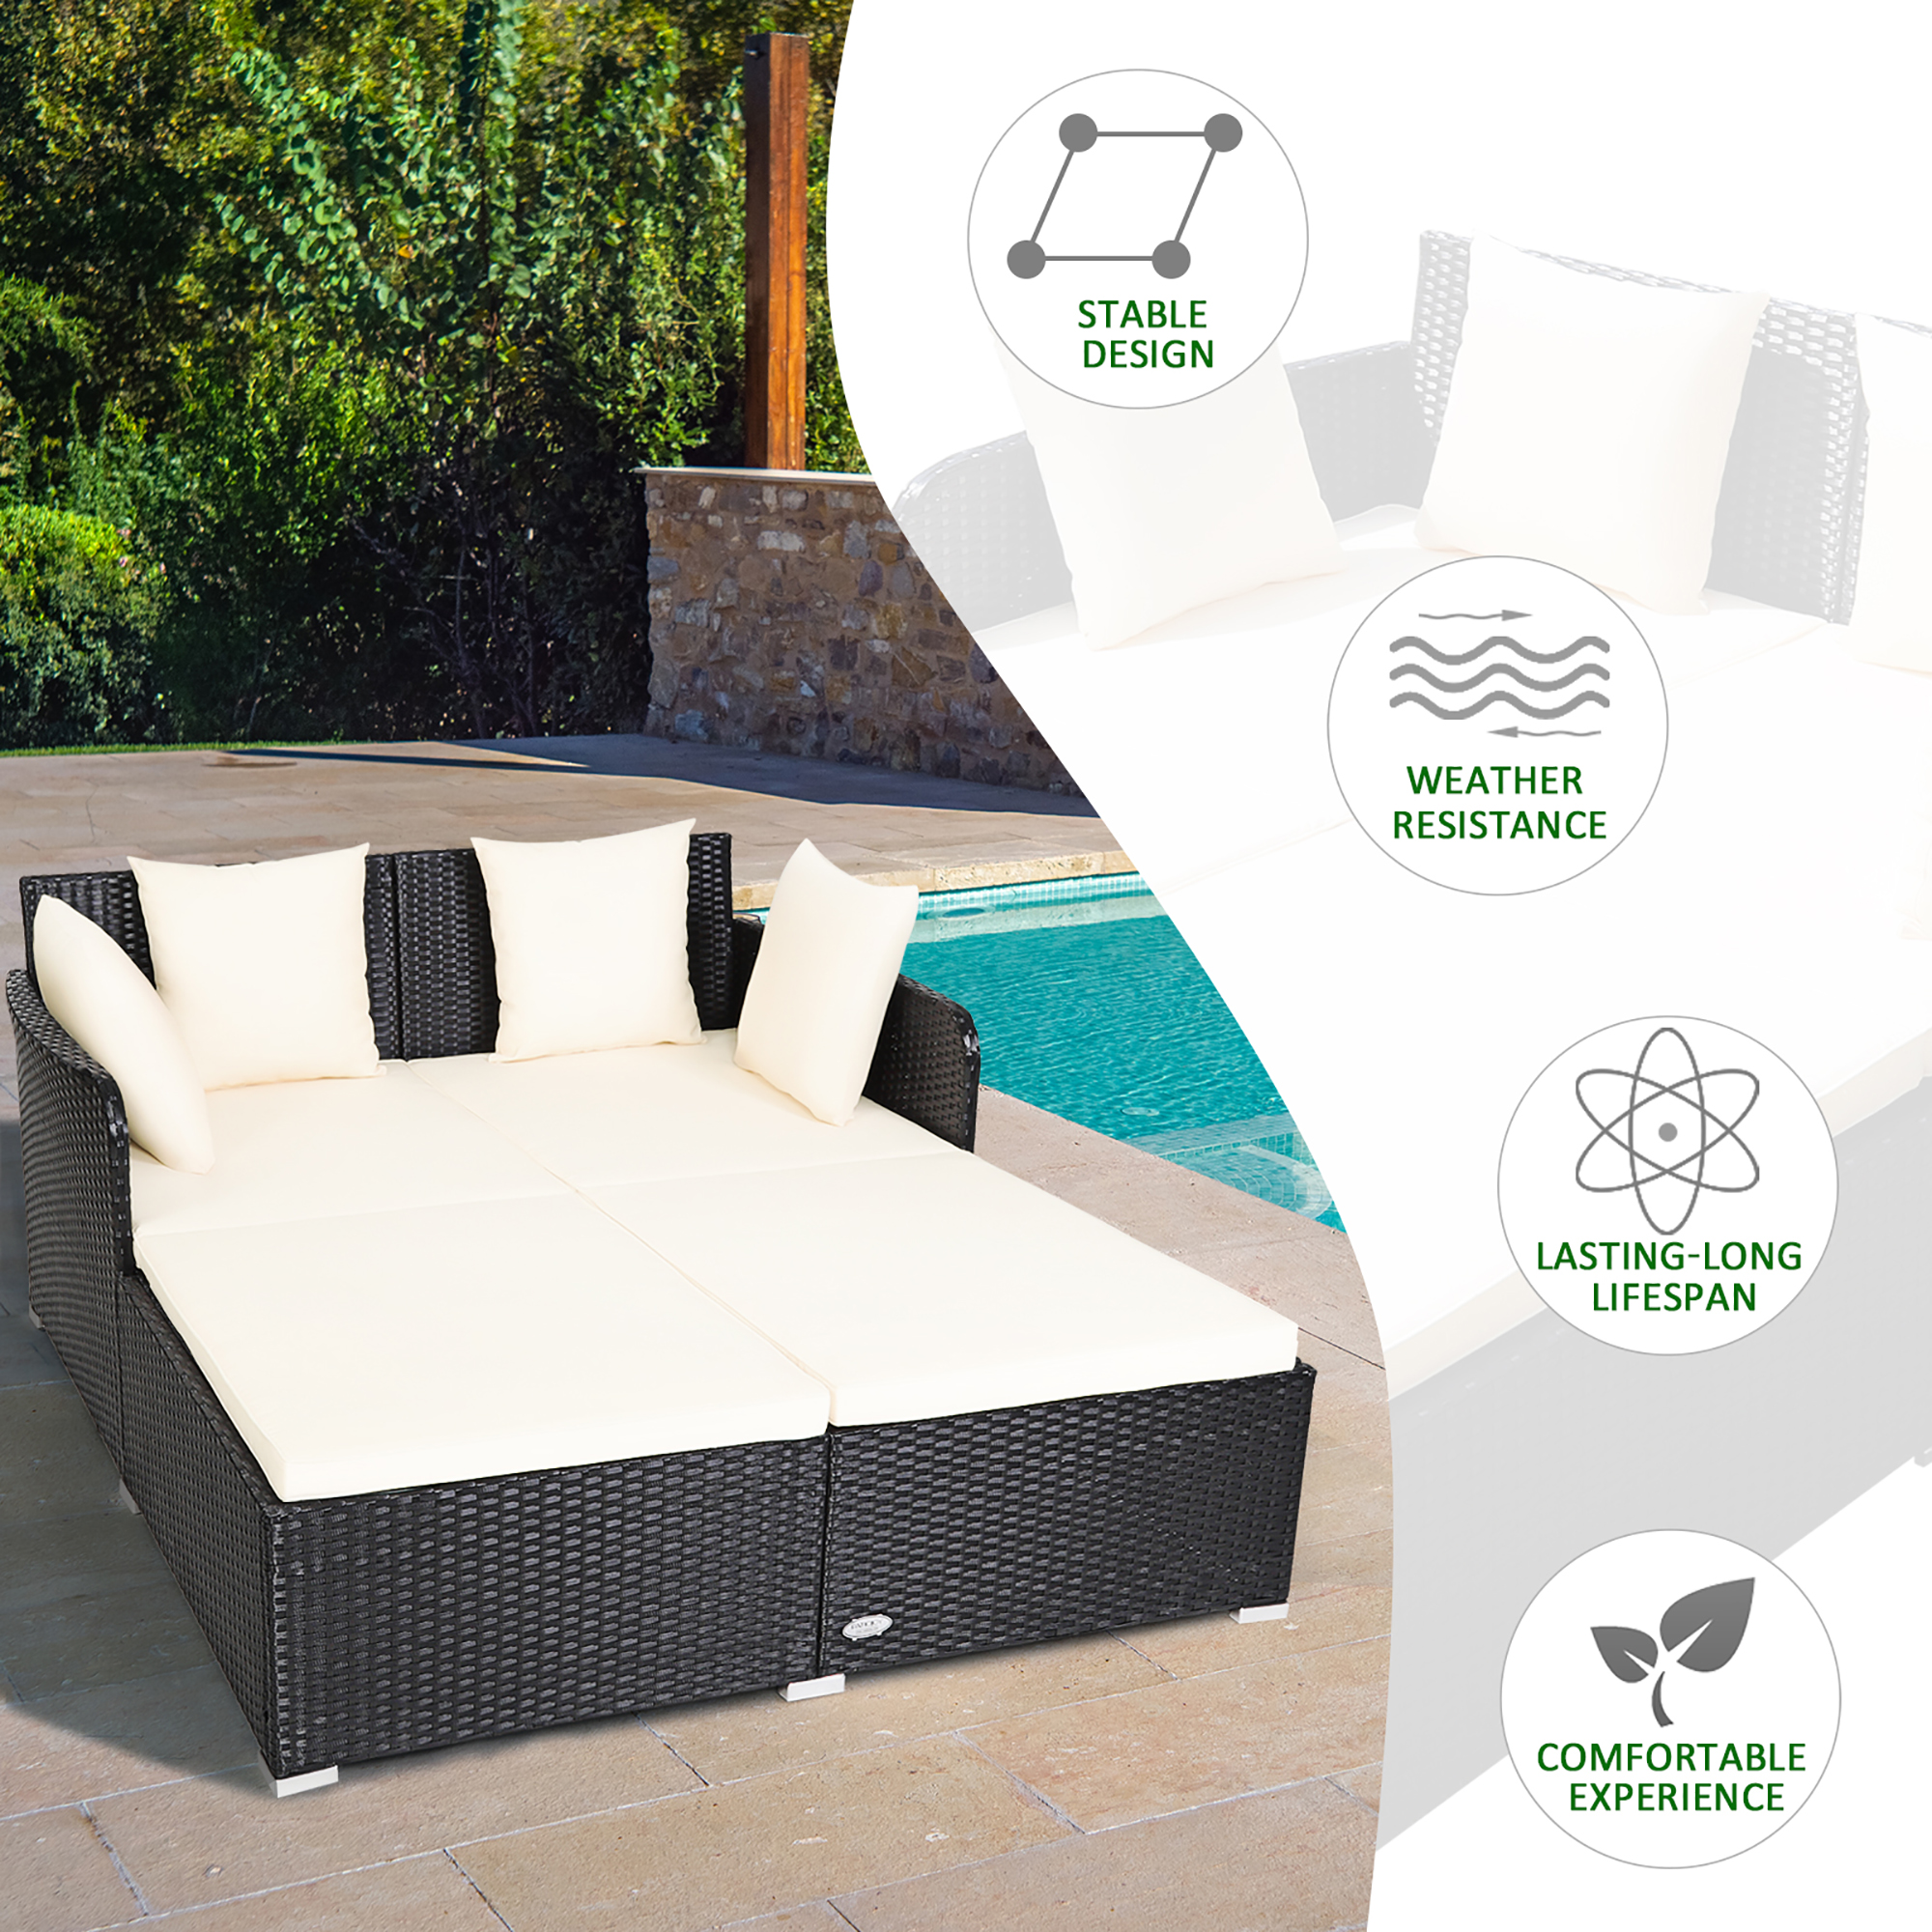 Costway Outdoor Patio Rattan Daybed Pillows Cushioned Sofa Furniture Beige - image 5 of 10